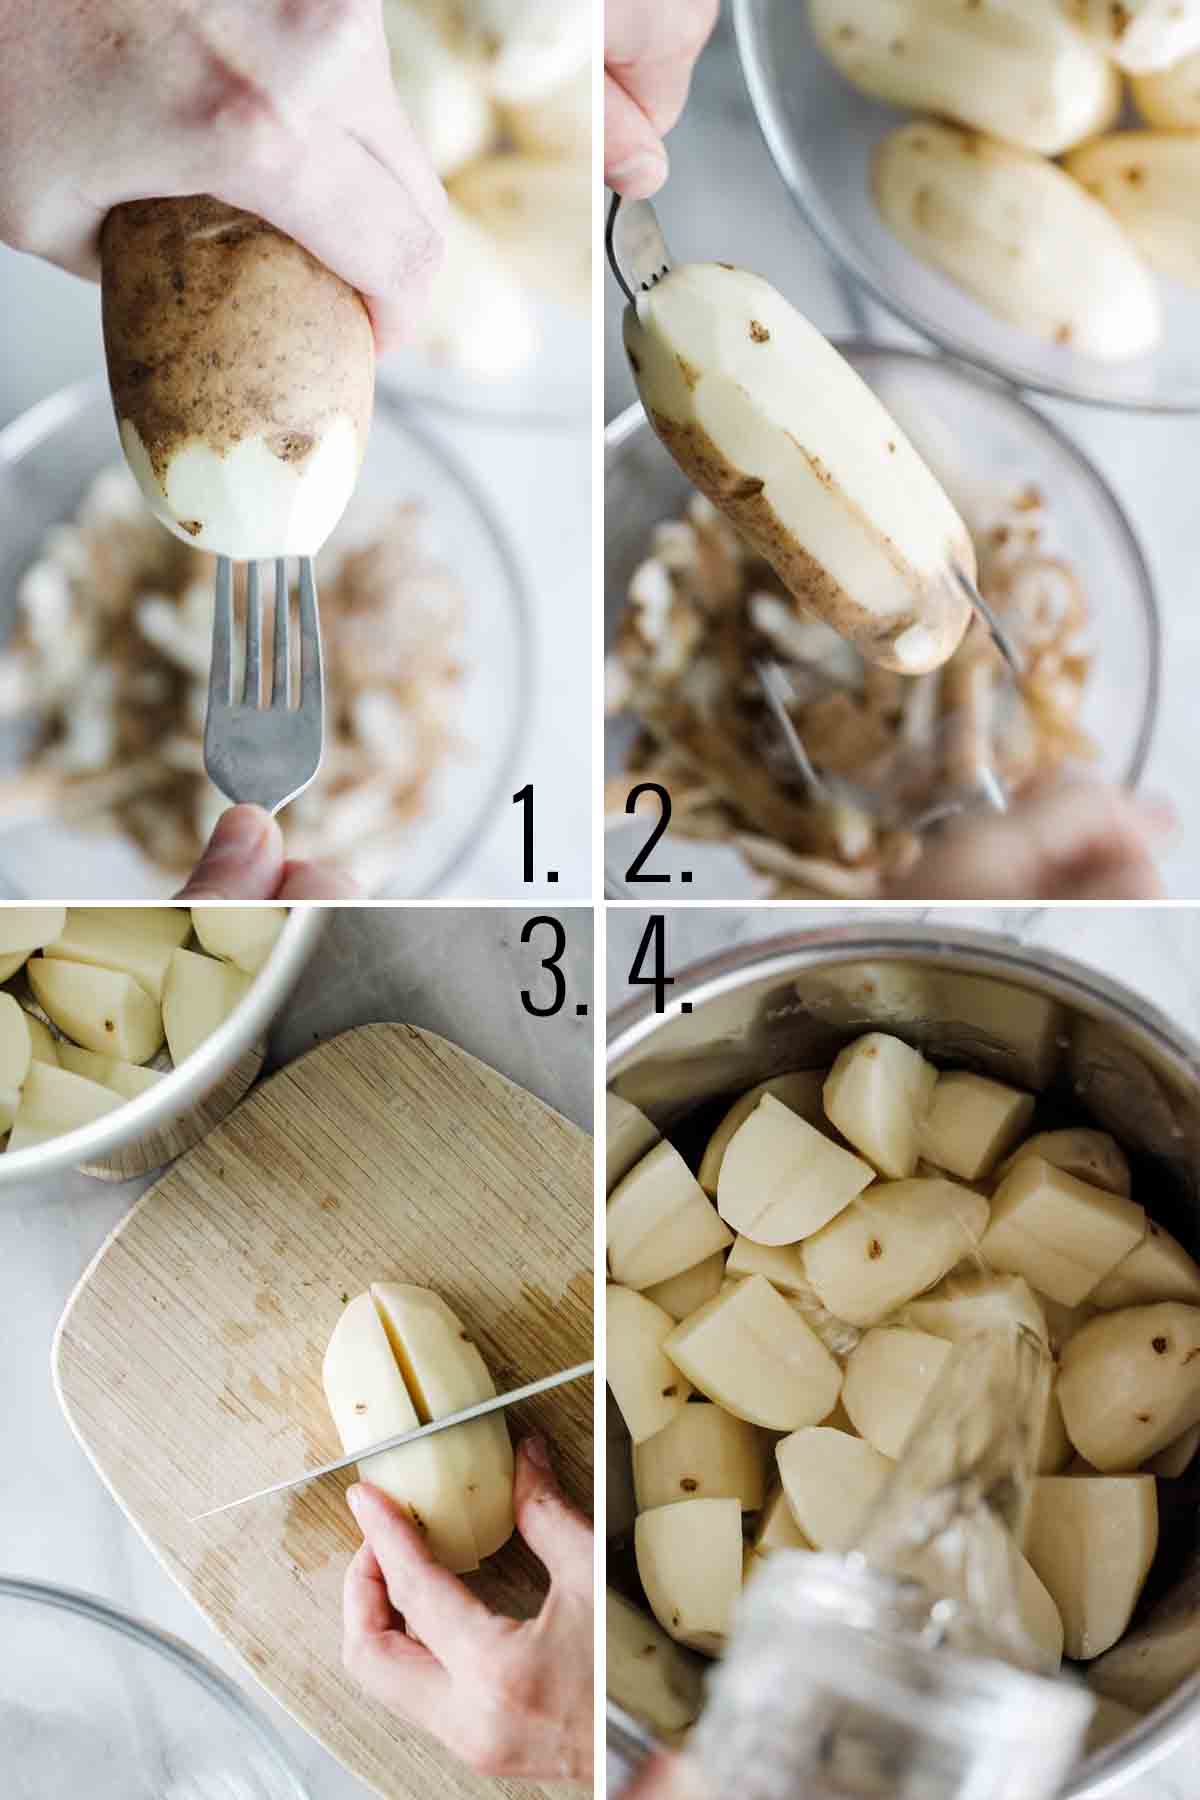 Photos showing peeling potatoes and cutting into quarters.